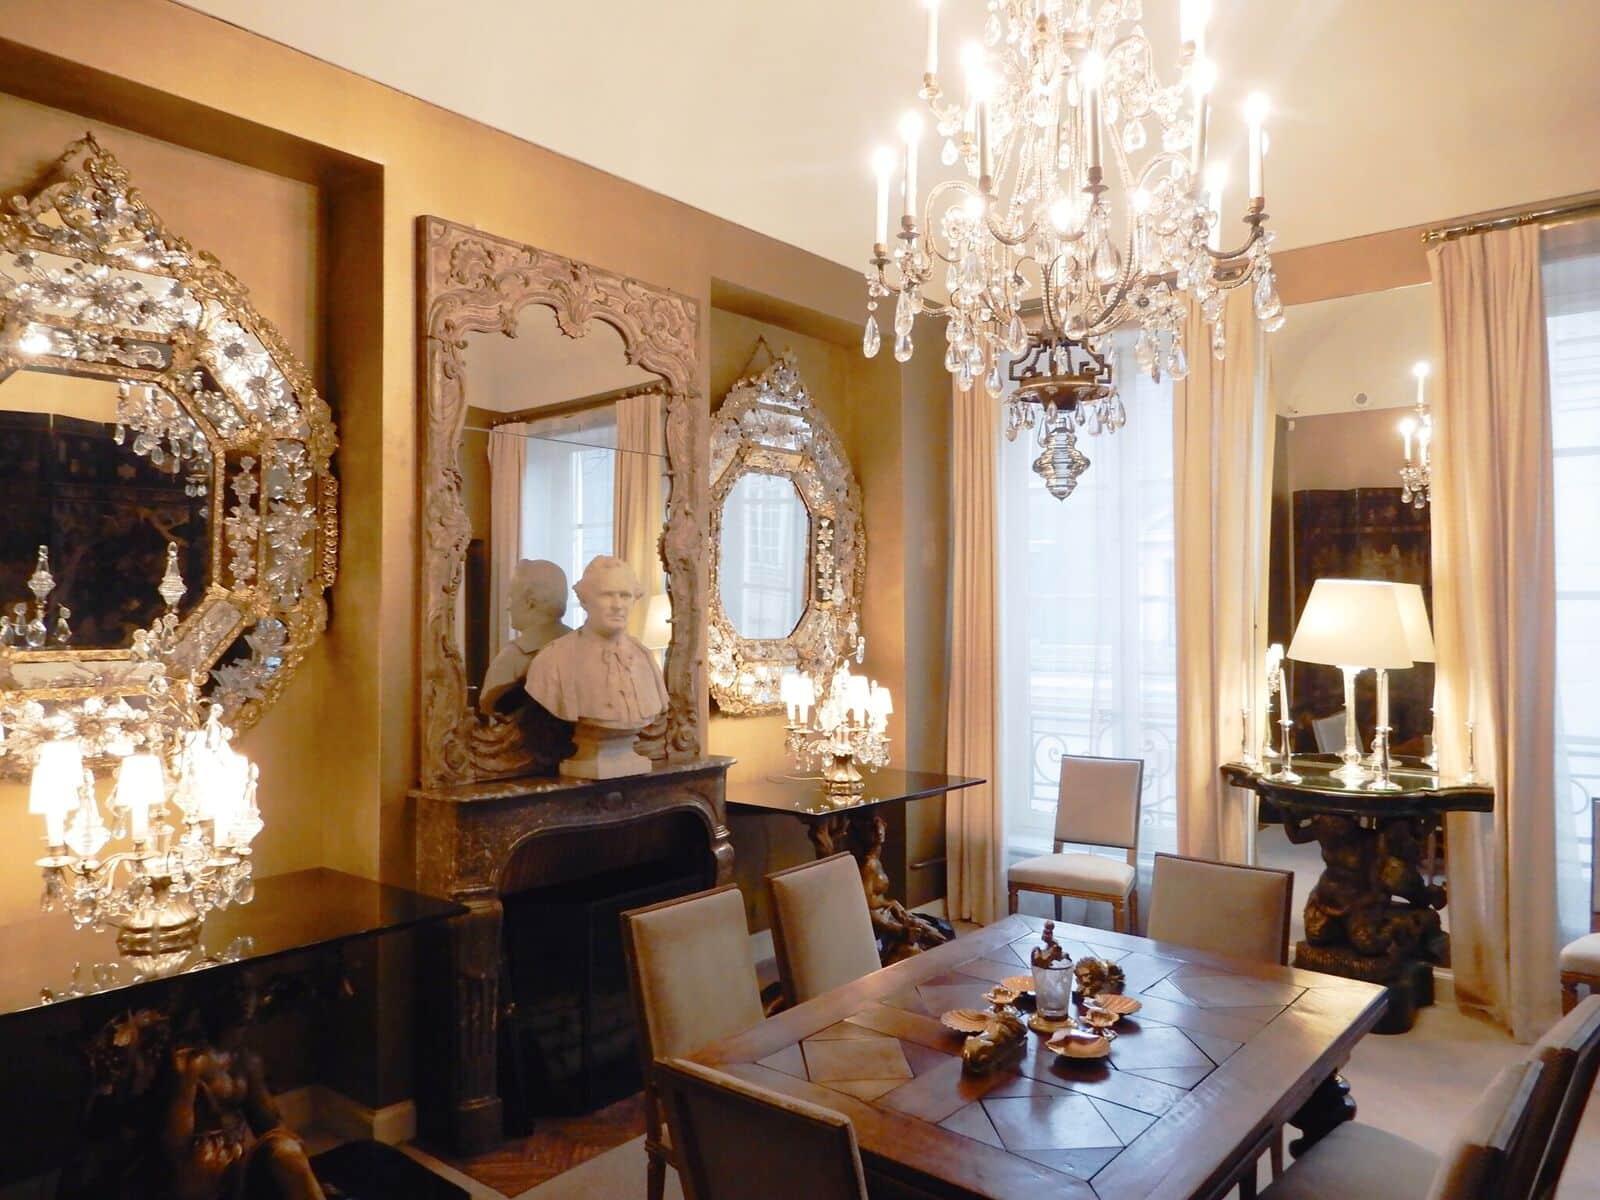 A Tour of Coco Chanel's Parisian Apartment – KC You There